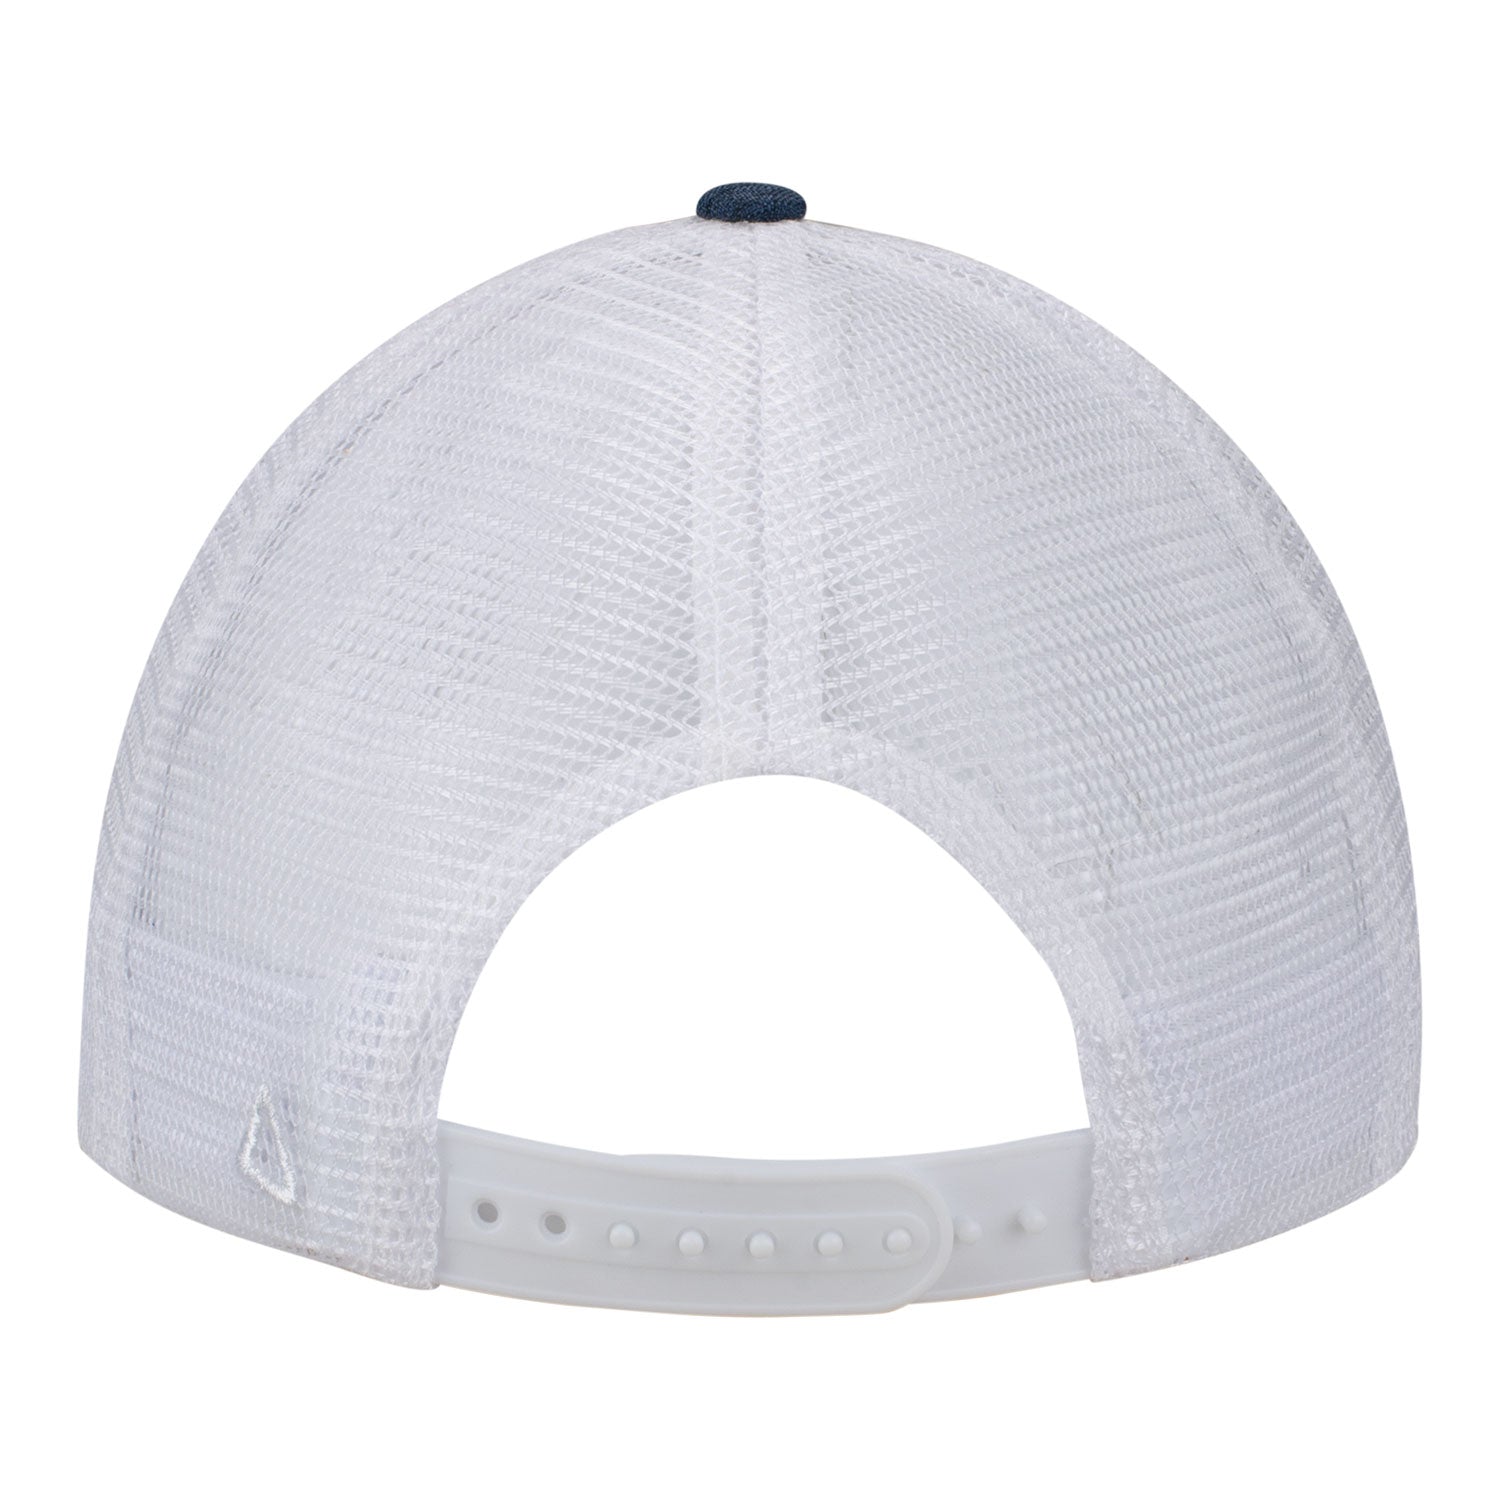 Ahead 2023 Ryder Cup Hat in Navy & White - US Ryder Cup